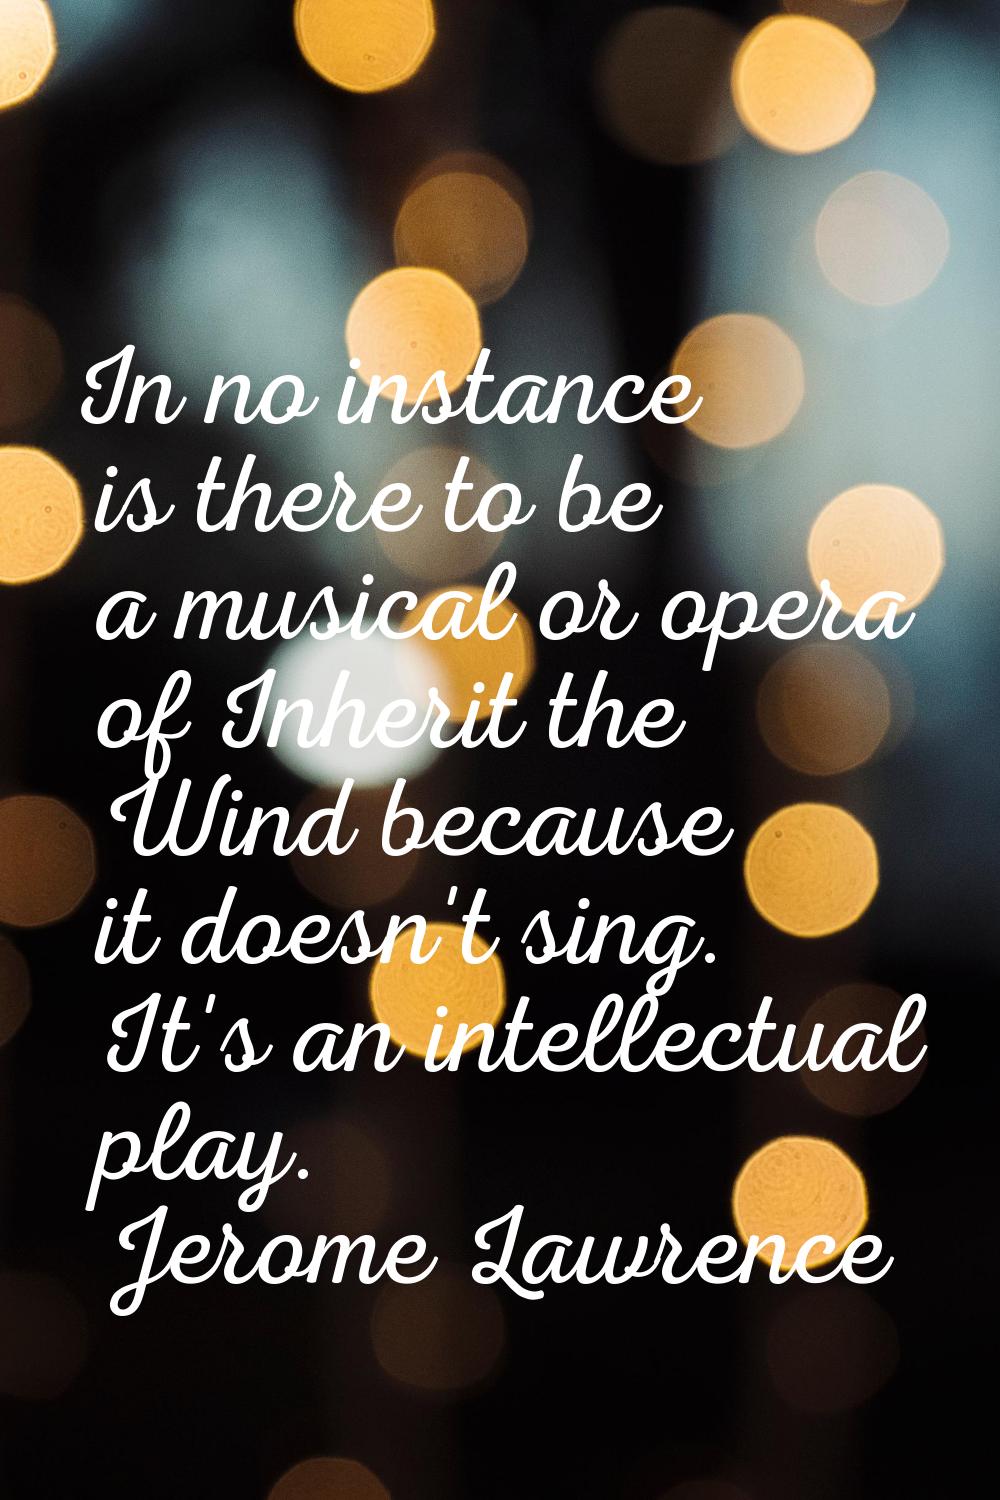 In no instance is there to be a musical or opera of Inherit the Wind because it doesn't sing. It's 